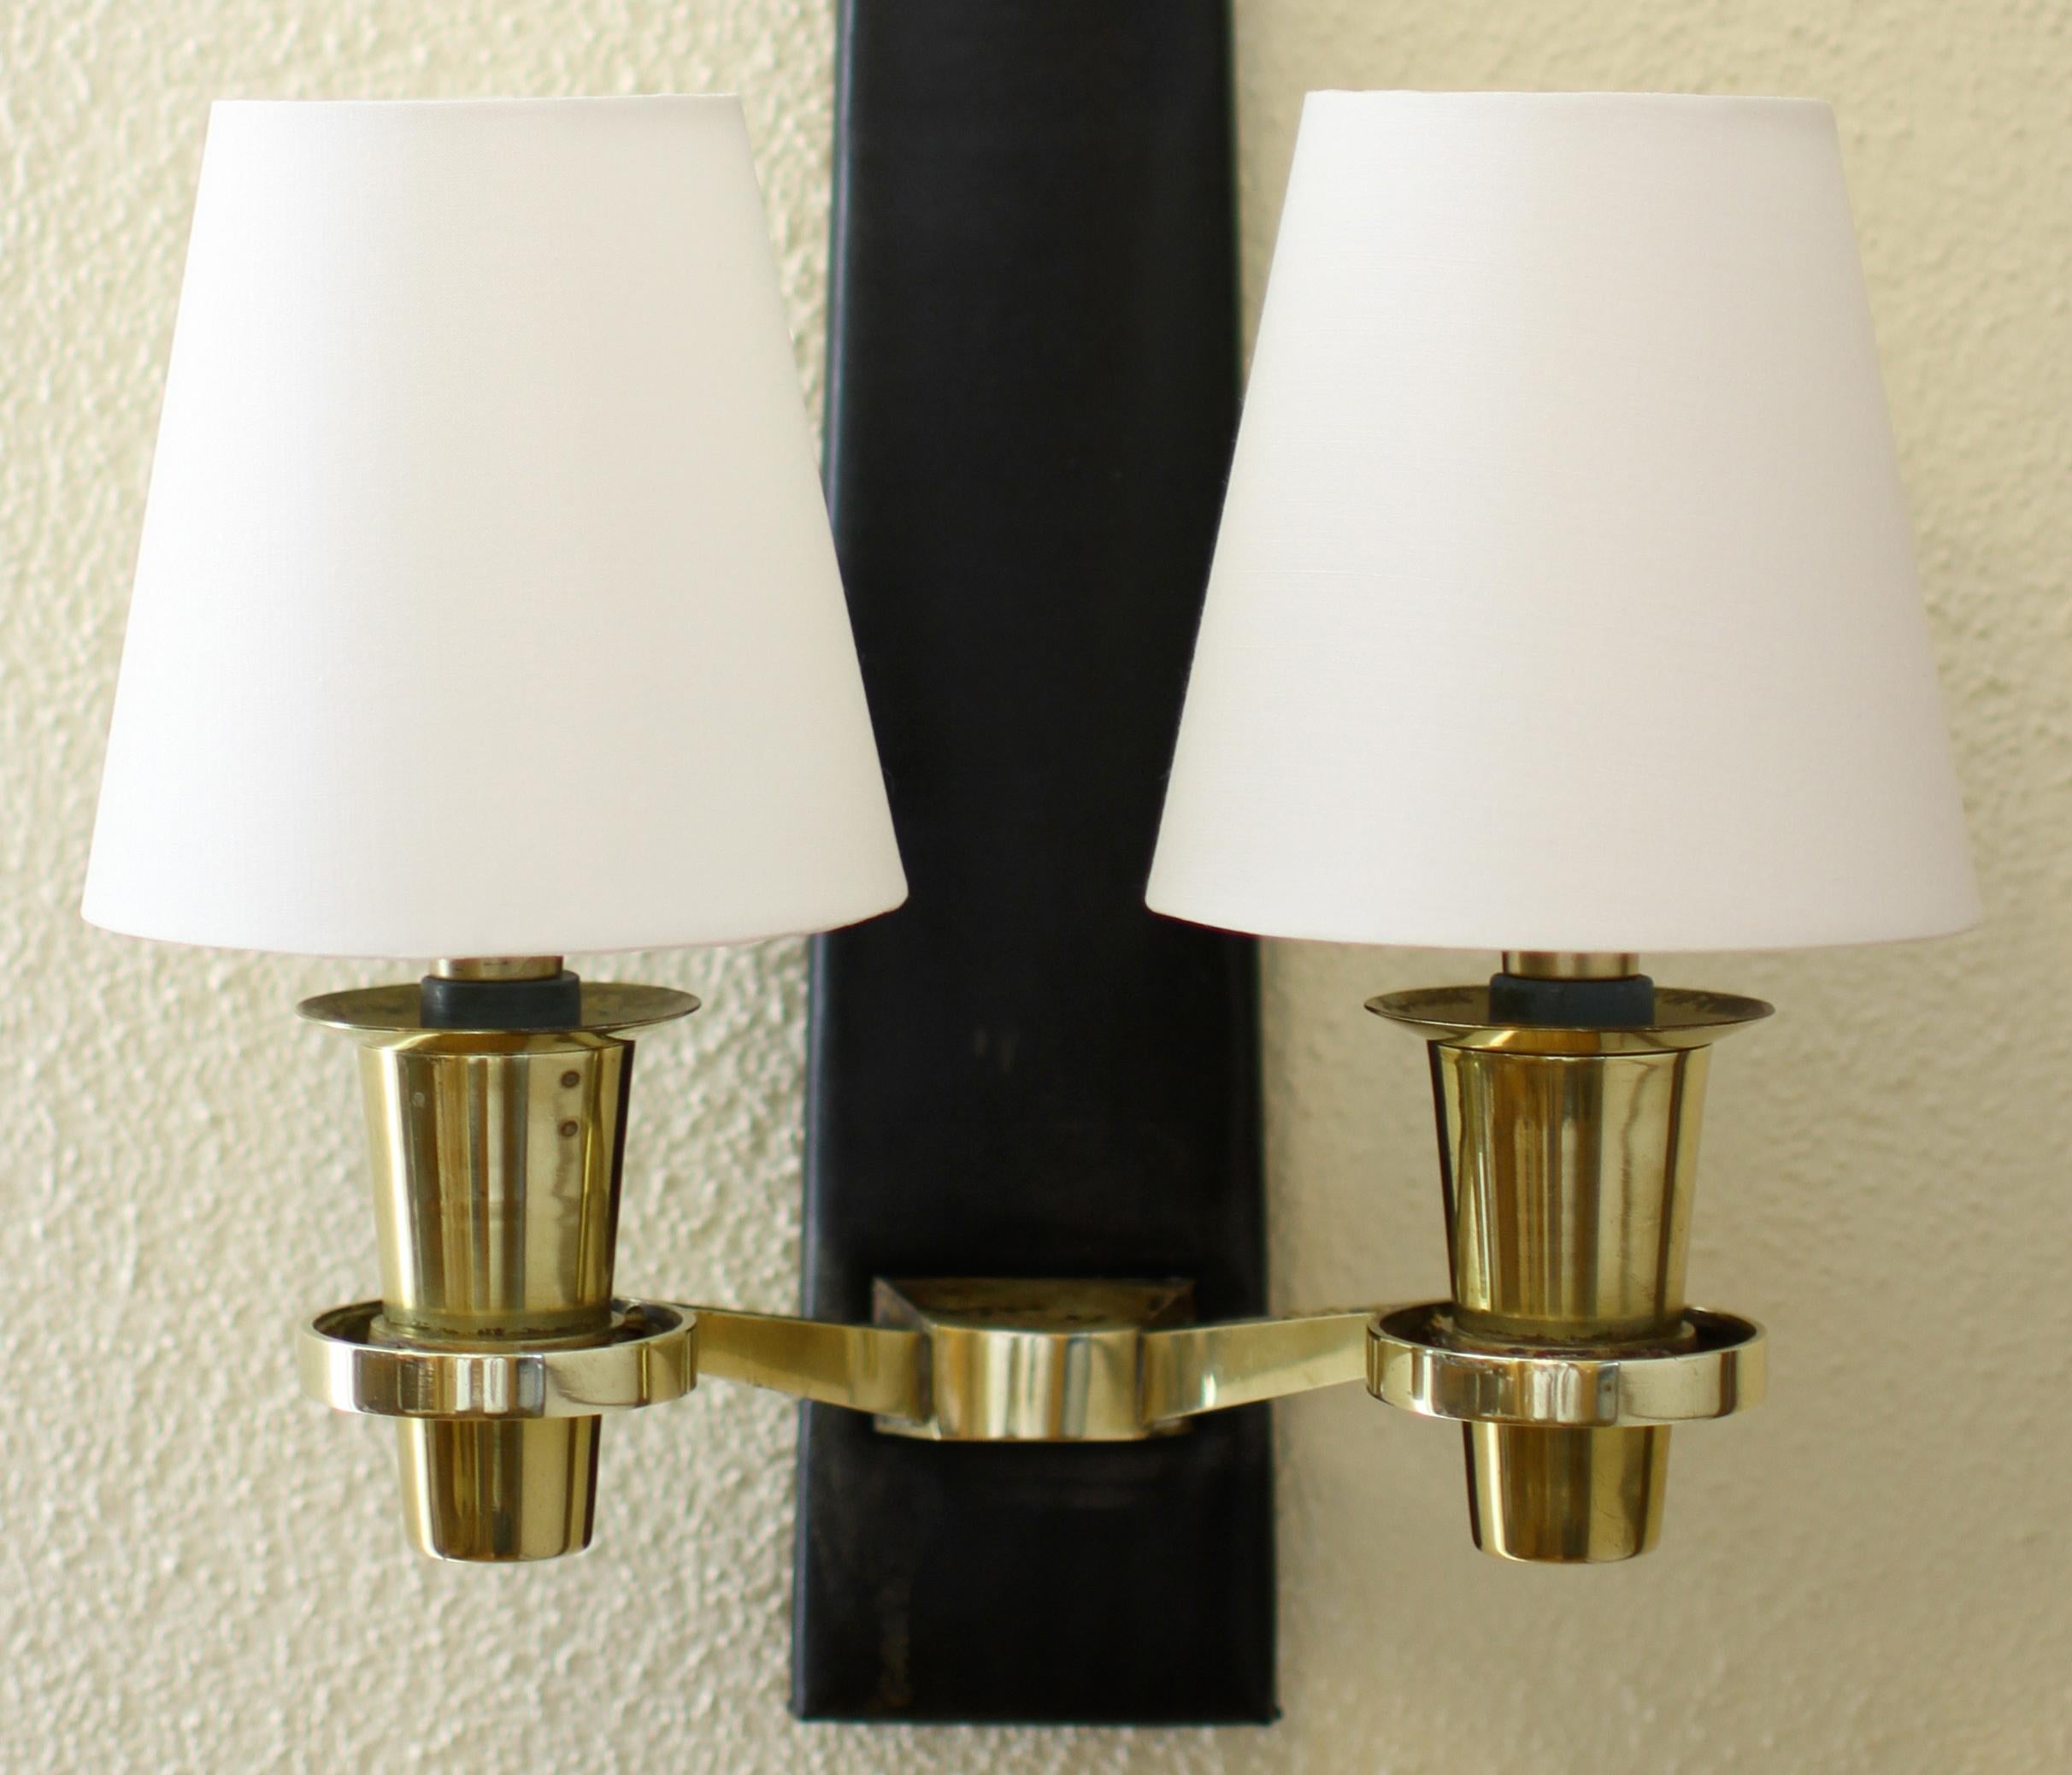 Blasset & Guggiari, One Sconce France 1957 In Good Condition For Sale In Encino, CA